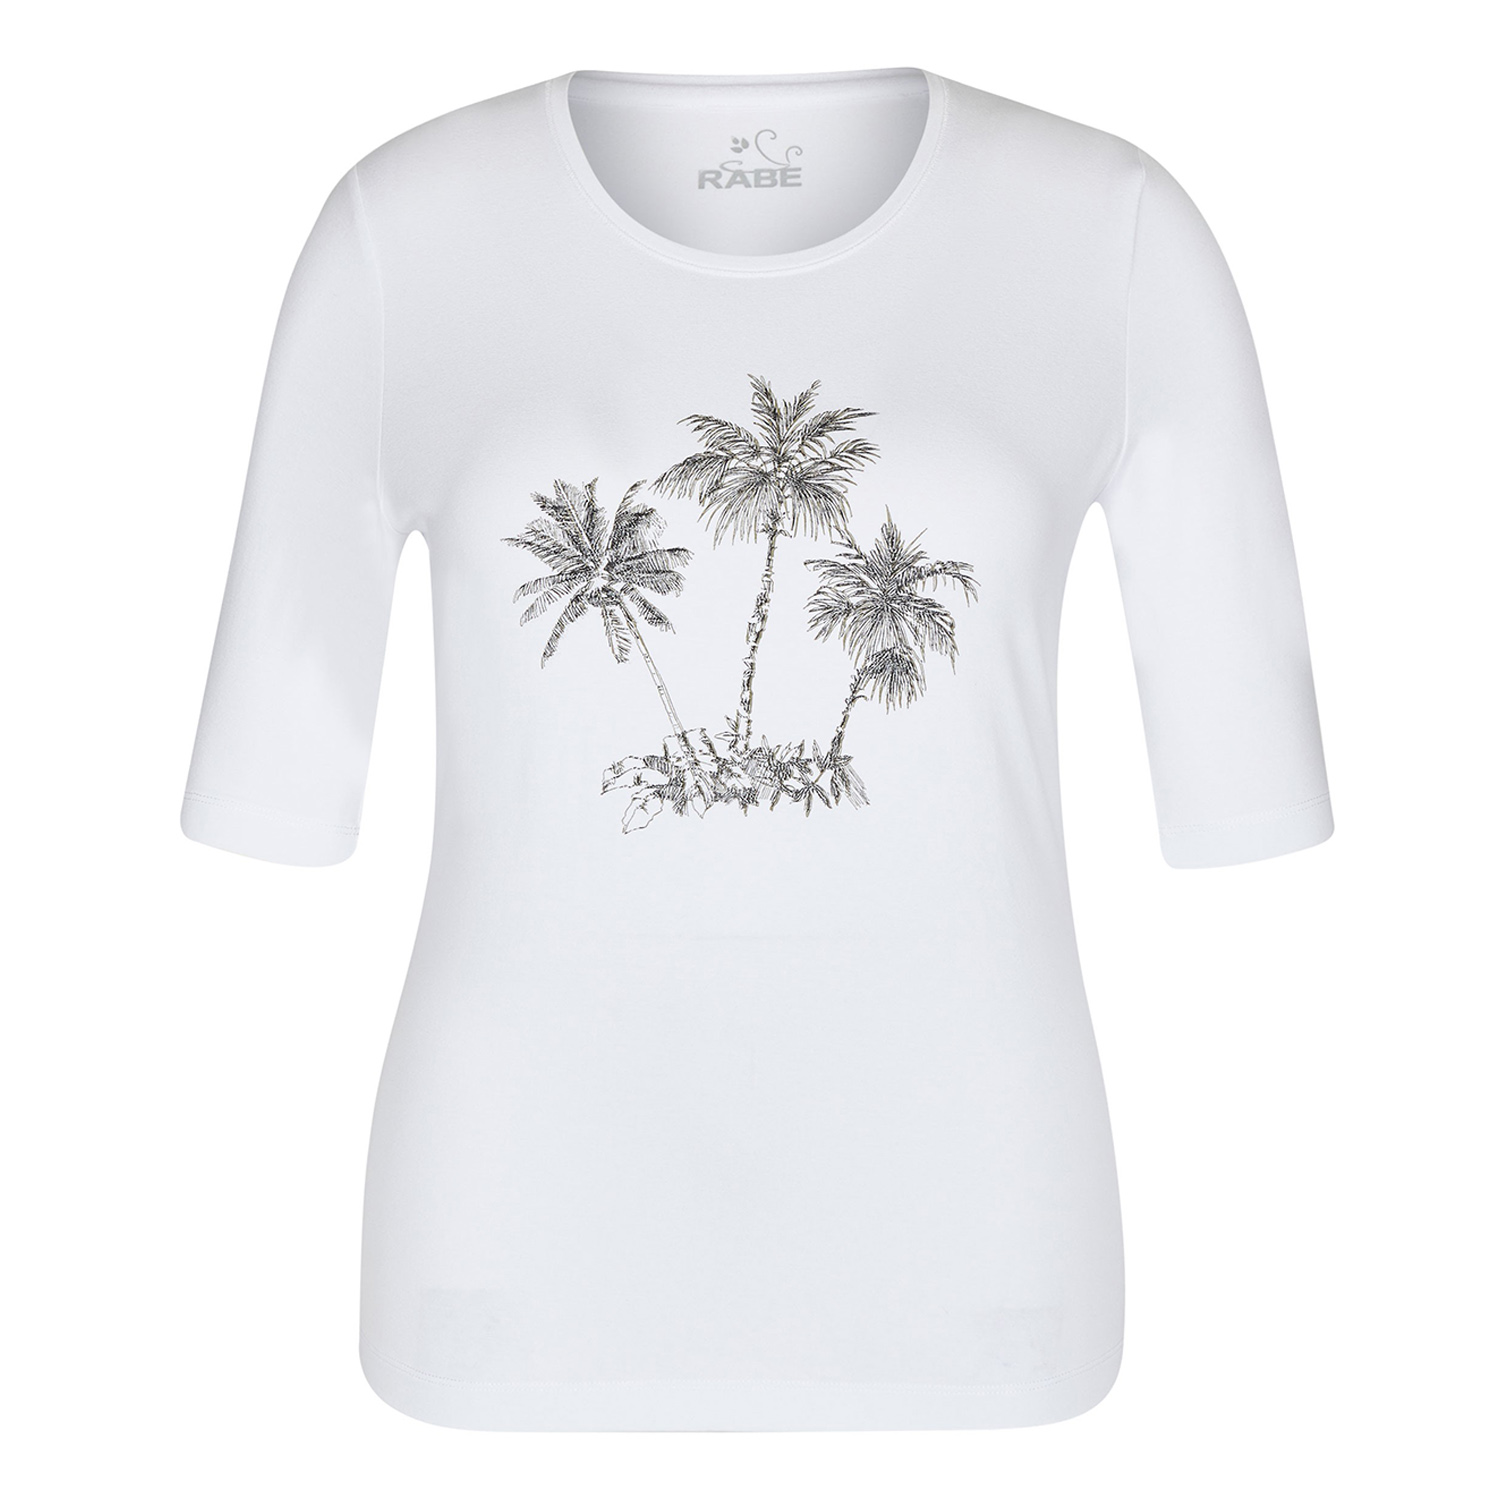 RABE AND – WITH NECKLINE T SHIRT Obsessions FRONT PRINT WHITE IN ROUND